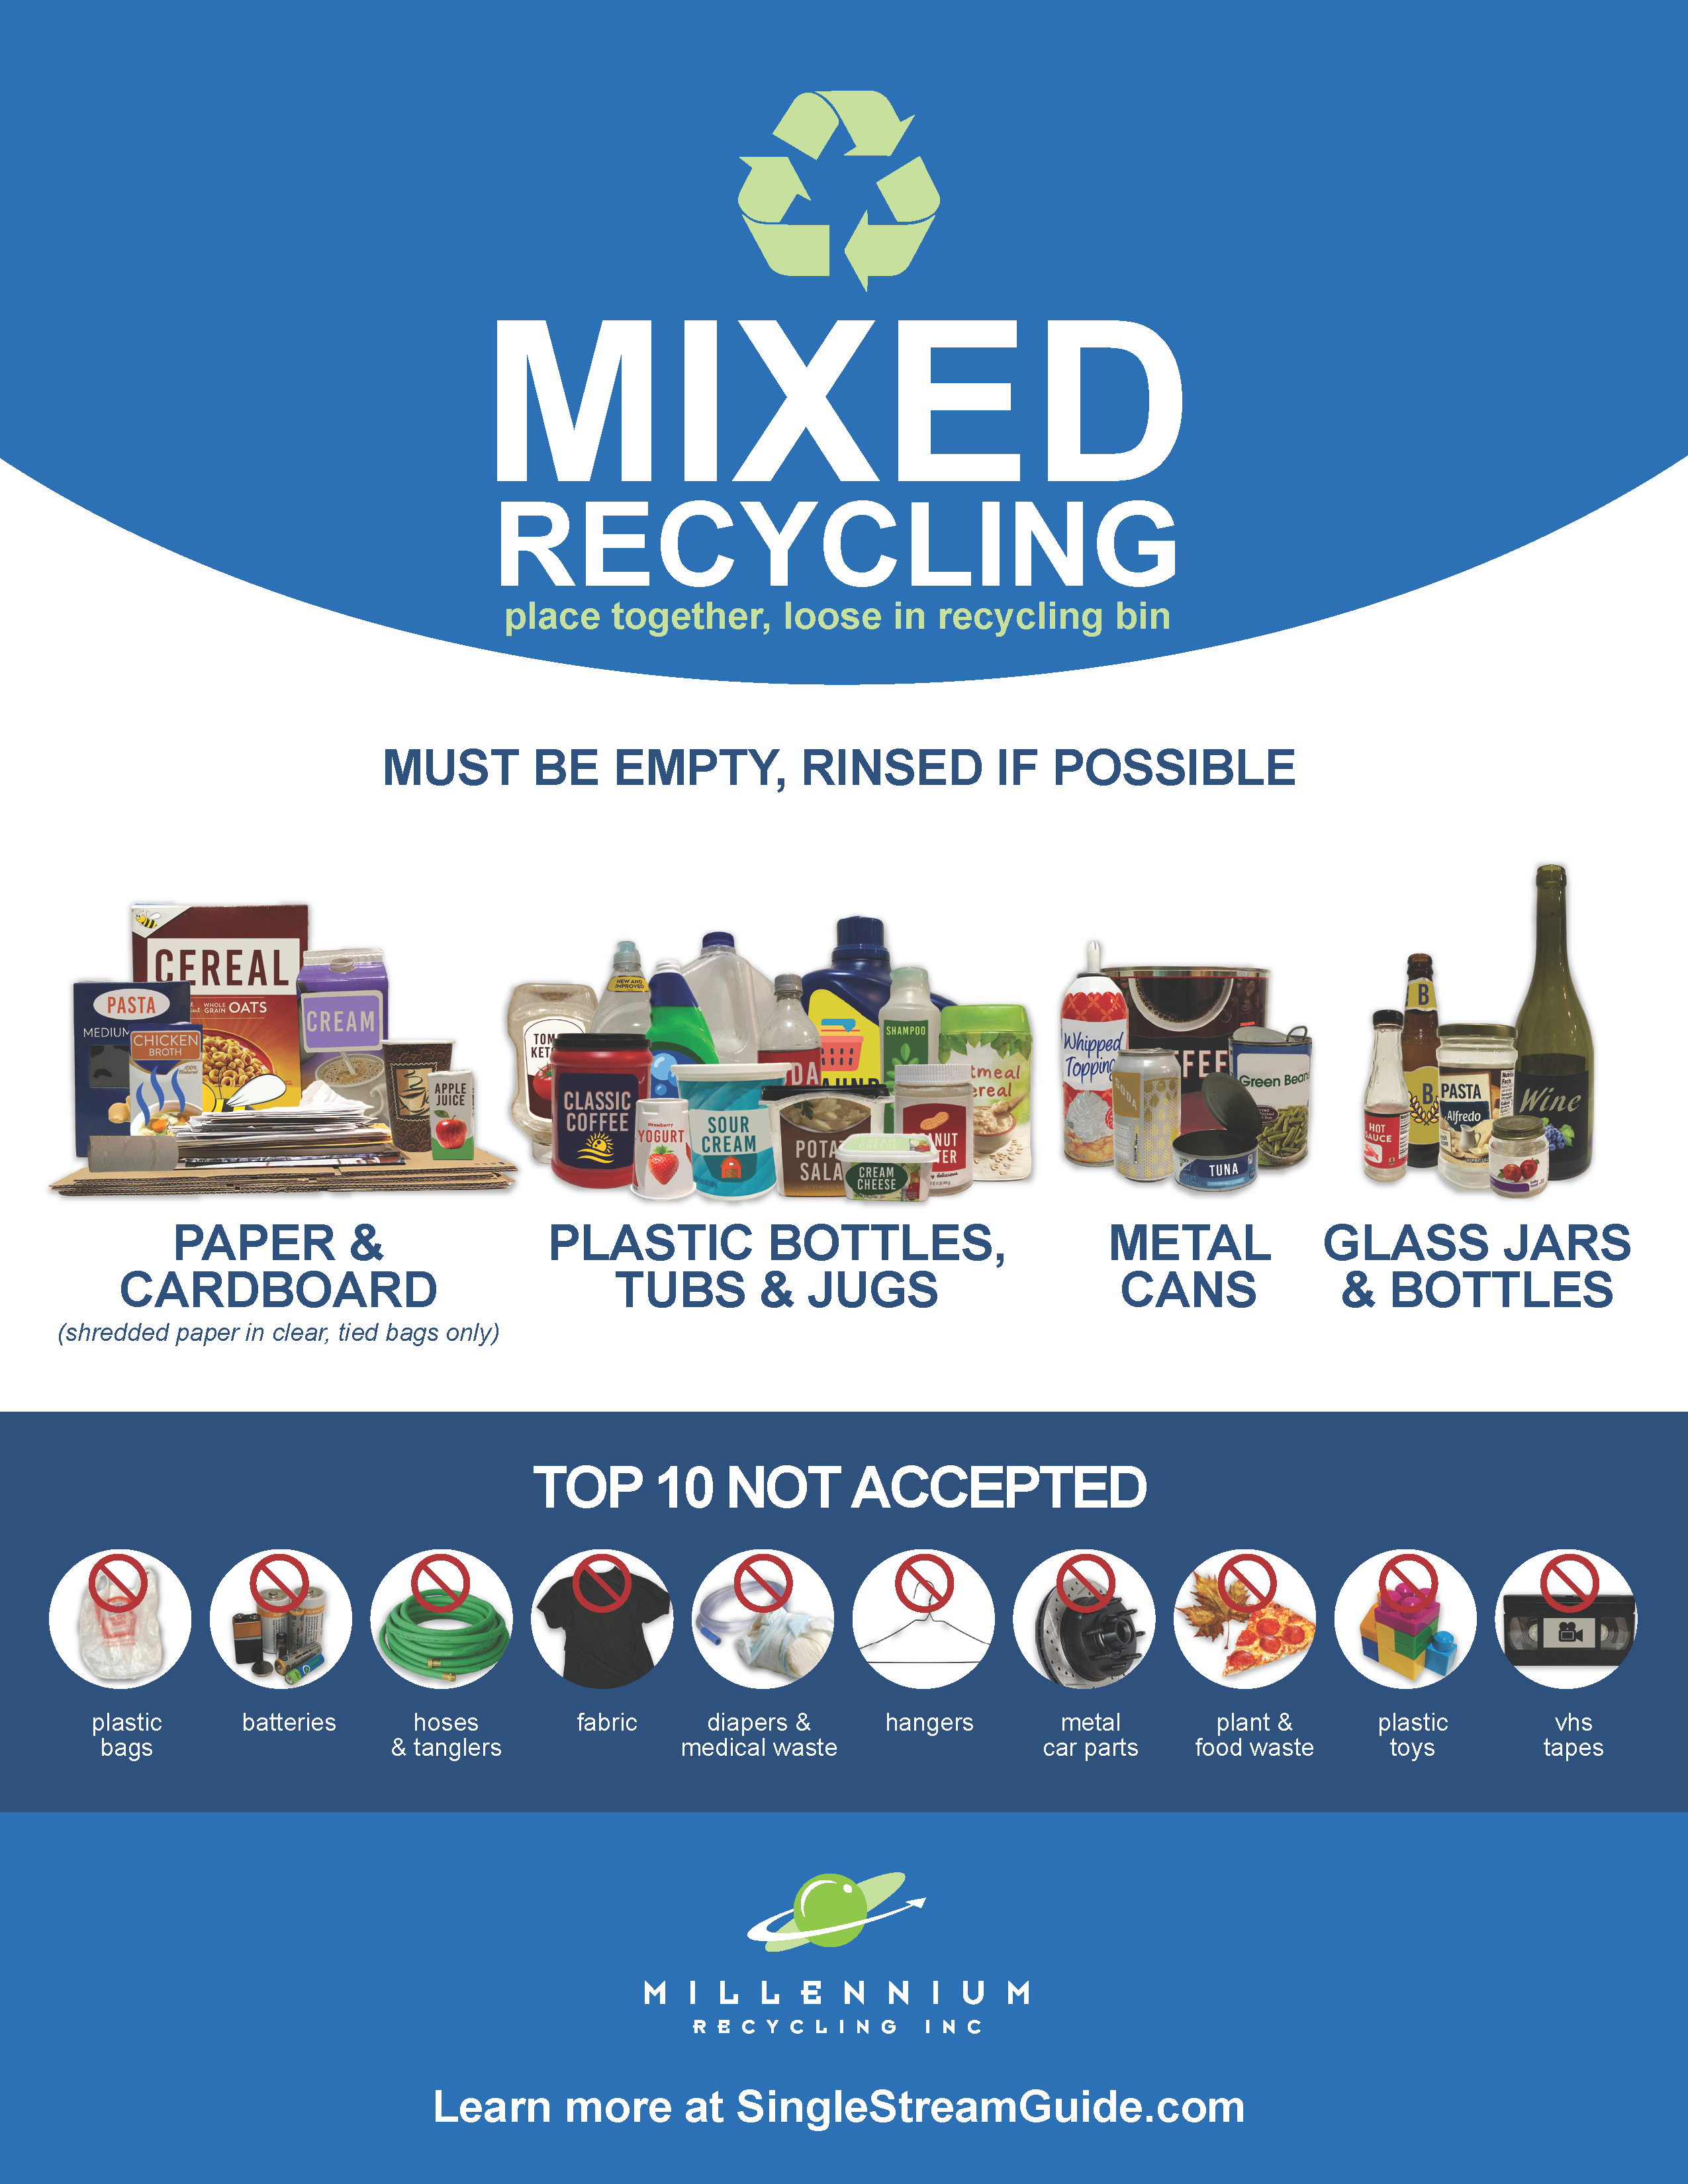 What Can You Recycle in Your Bin?